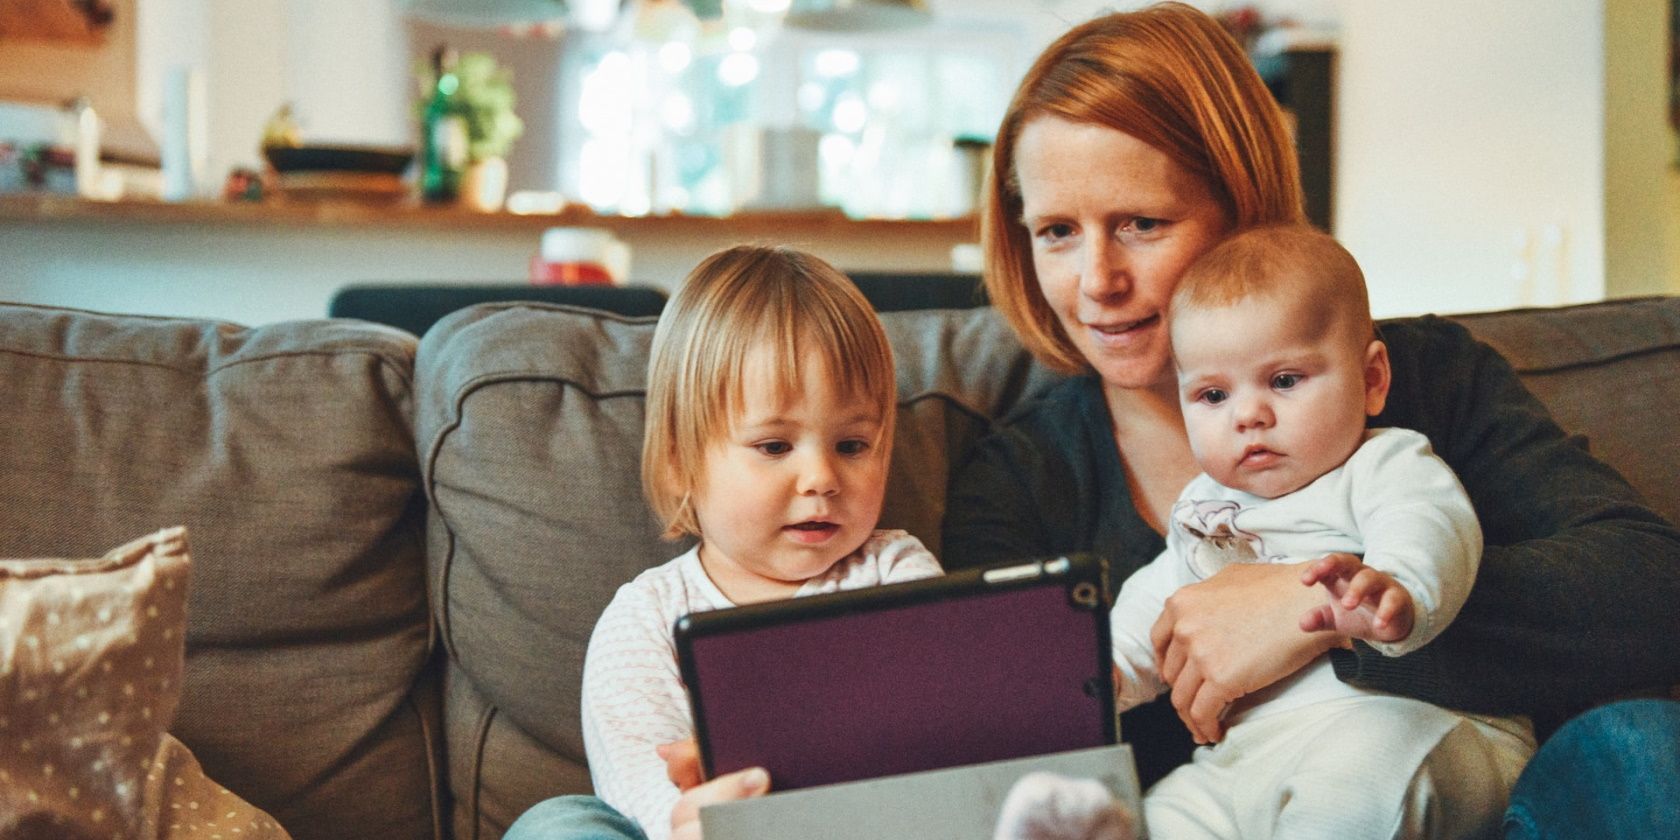 Mother playing on a tablet with her two small children